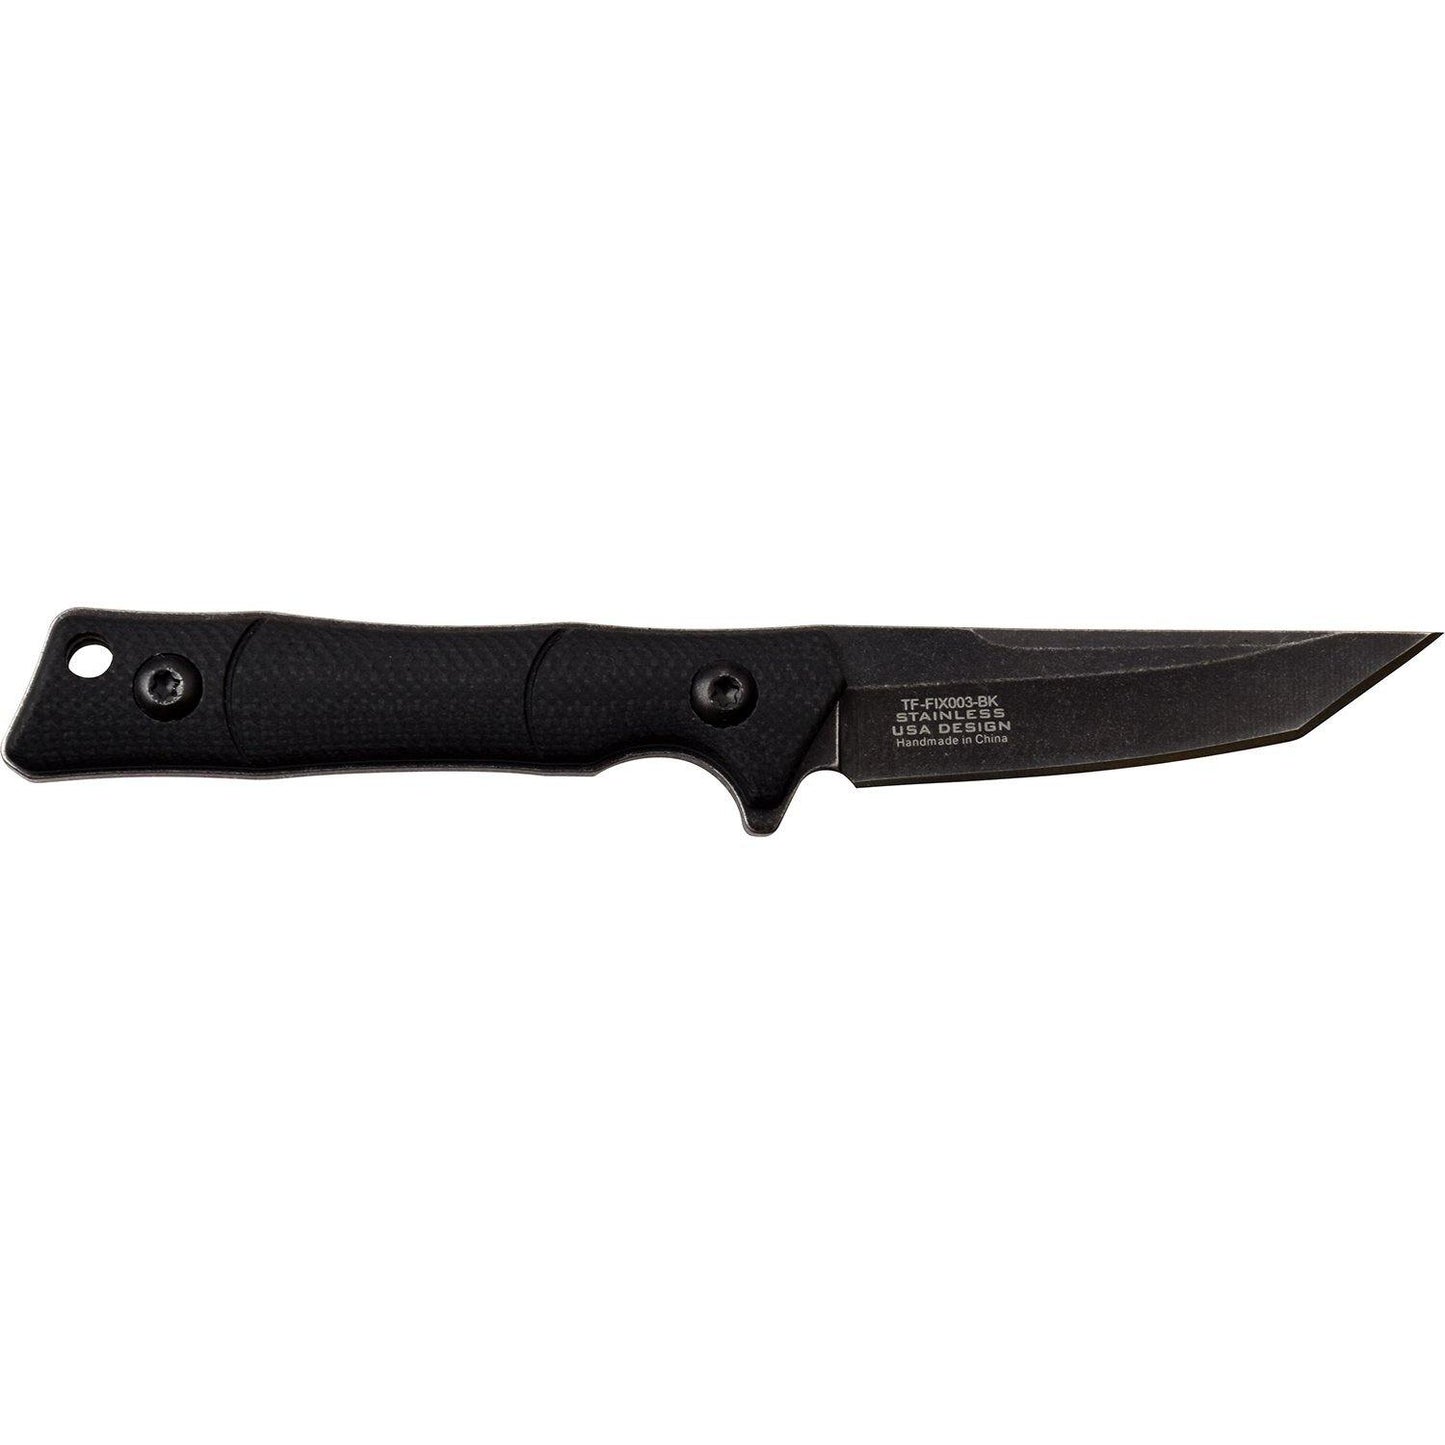 Tac-Force Tanto Tactical Fixed Blade Knife - G10 Handle 5 Inches Overall #tf-Fix003Bk - Xhunter New Zealand